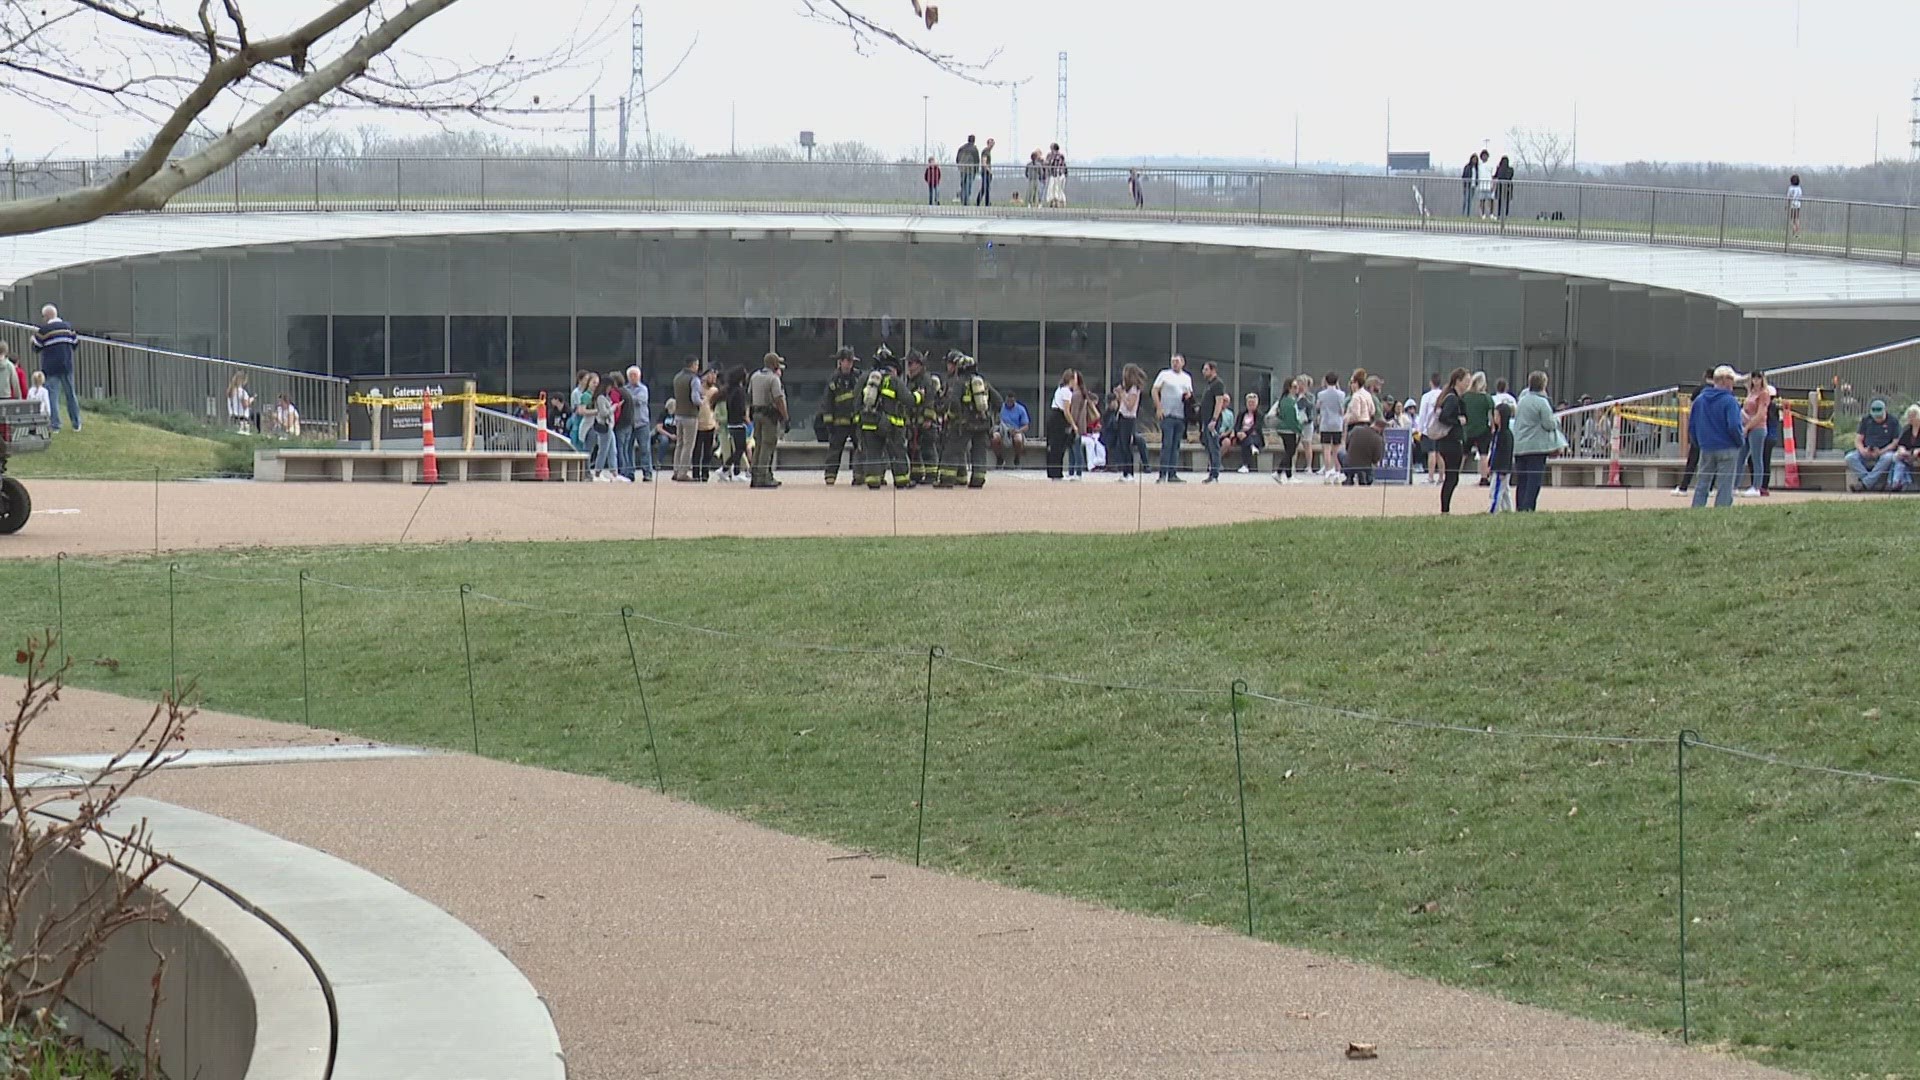 The St. Louis Fire Department responded to an incident at the Gateway Arch at around 10:40 a.m. Monday. A tram control panel caused light smoke.